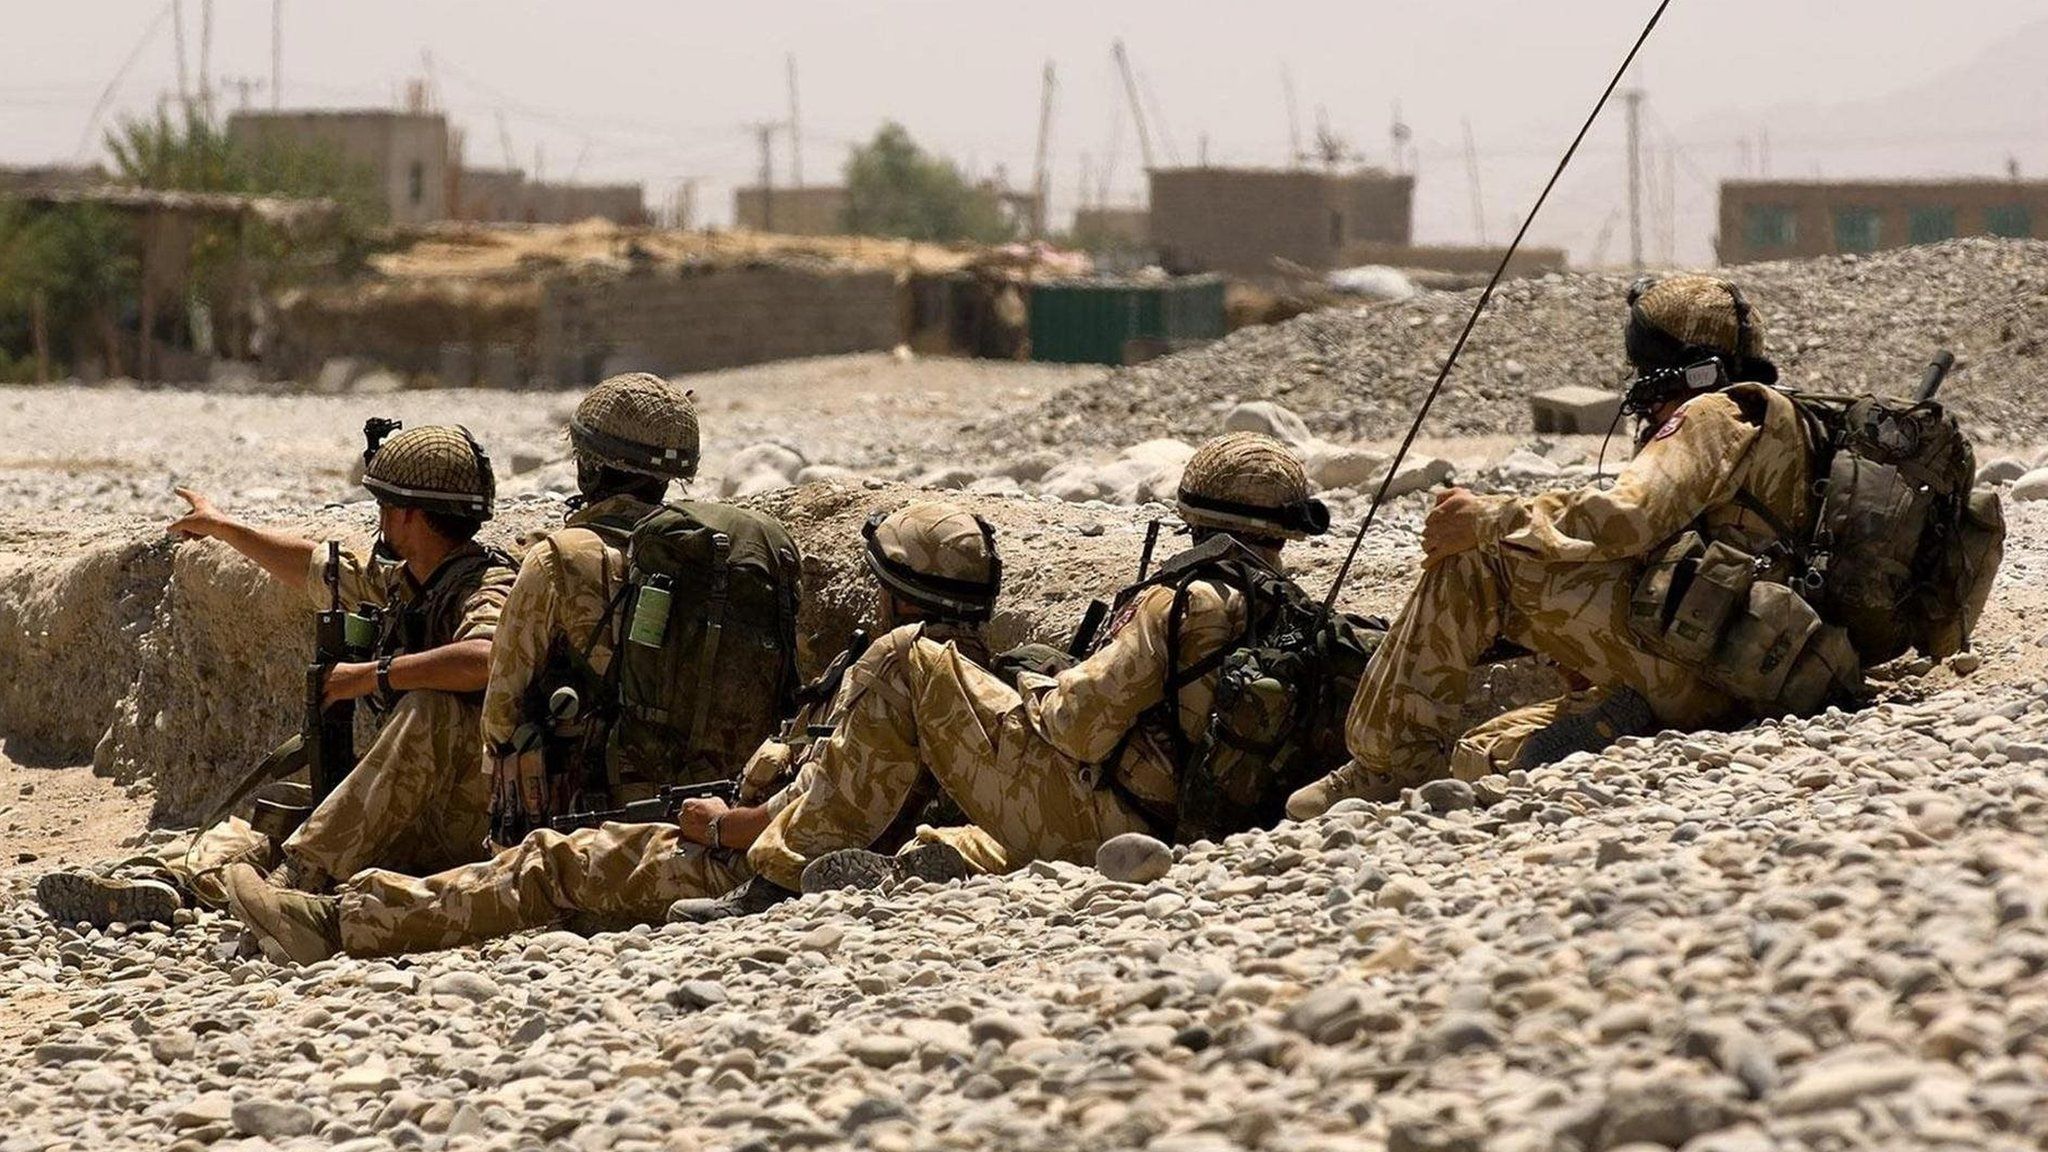 Handout photo issued by the MoD of British soldiers from 3 Para and 1 Royal Irish conducting clearance patrols in and around the town of Sangin, Helmand Province, Afghanistan